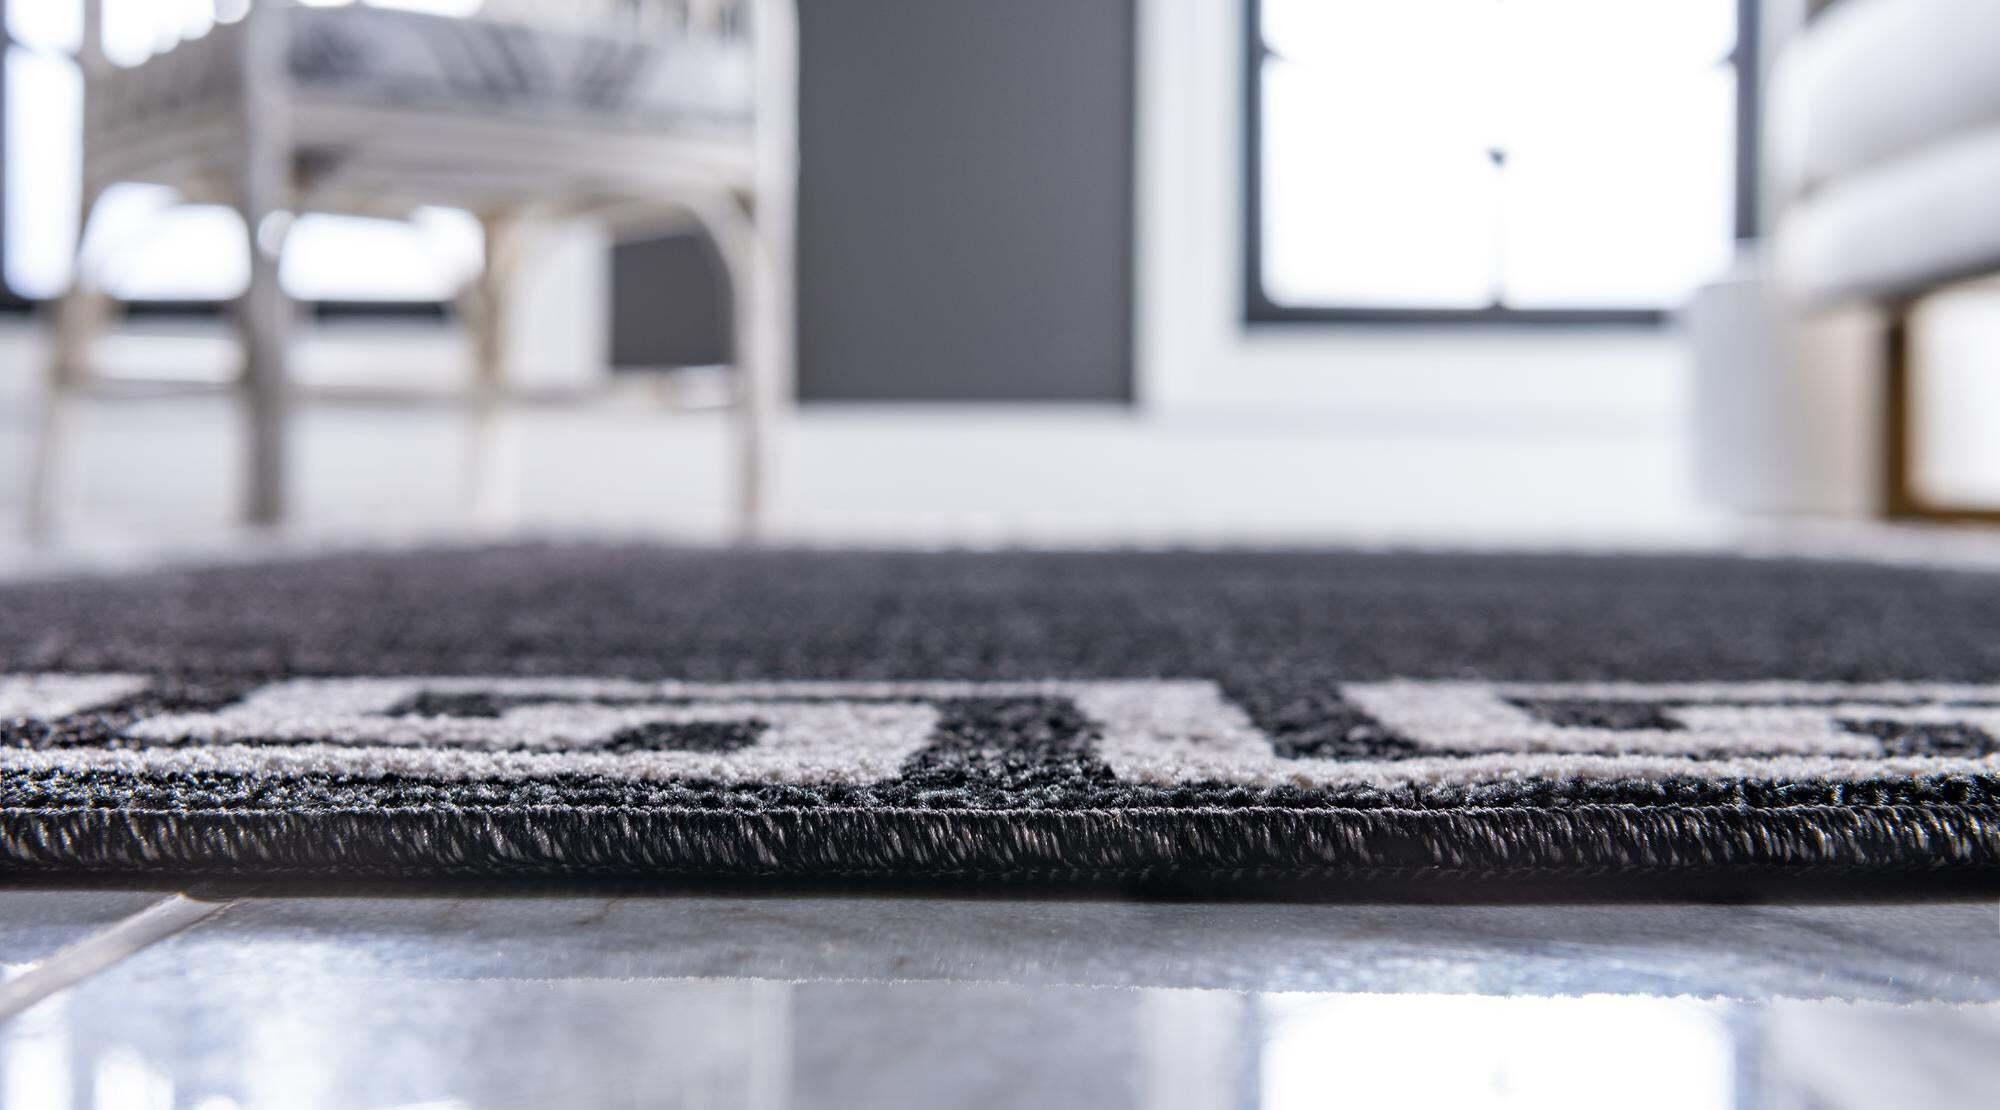 Unique Loom Indoor Rugs - Athens 6' x 6' Round Rug Charcoal